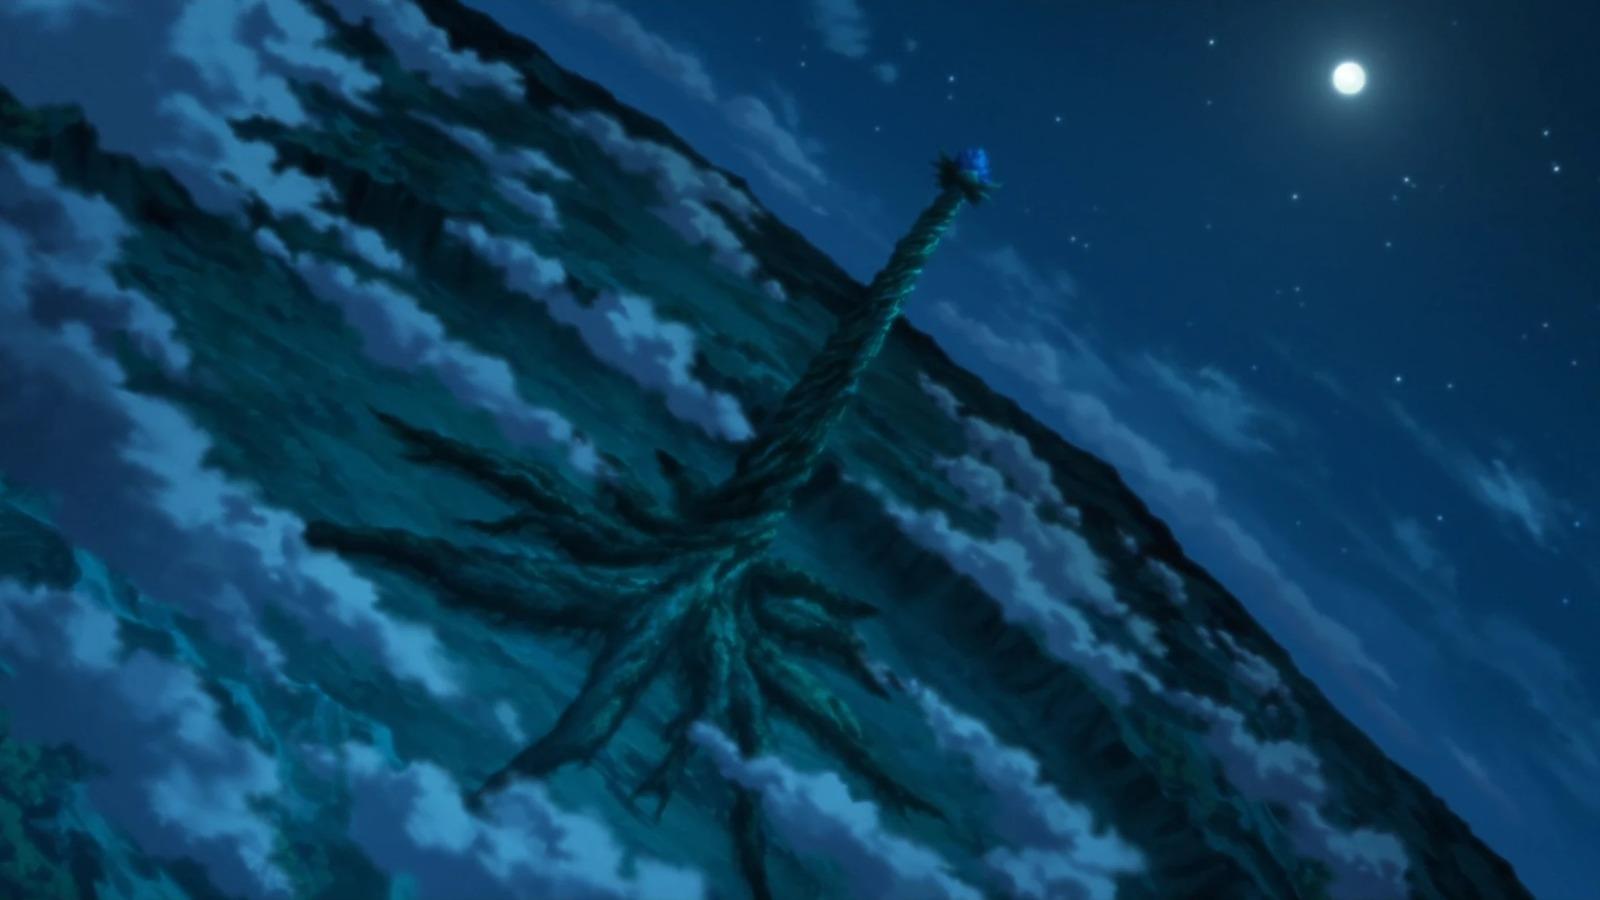 An image of the God Tree in Naruto